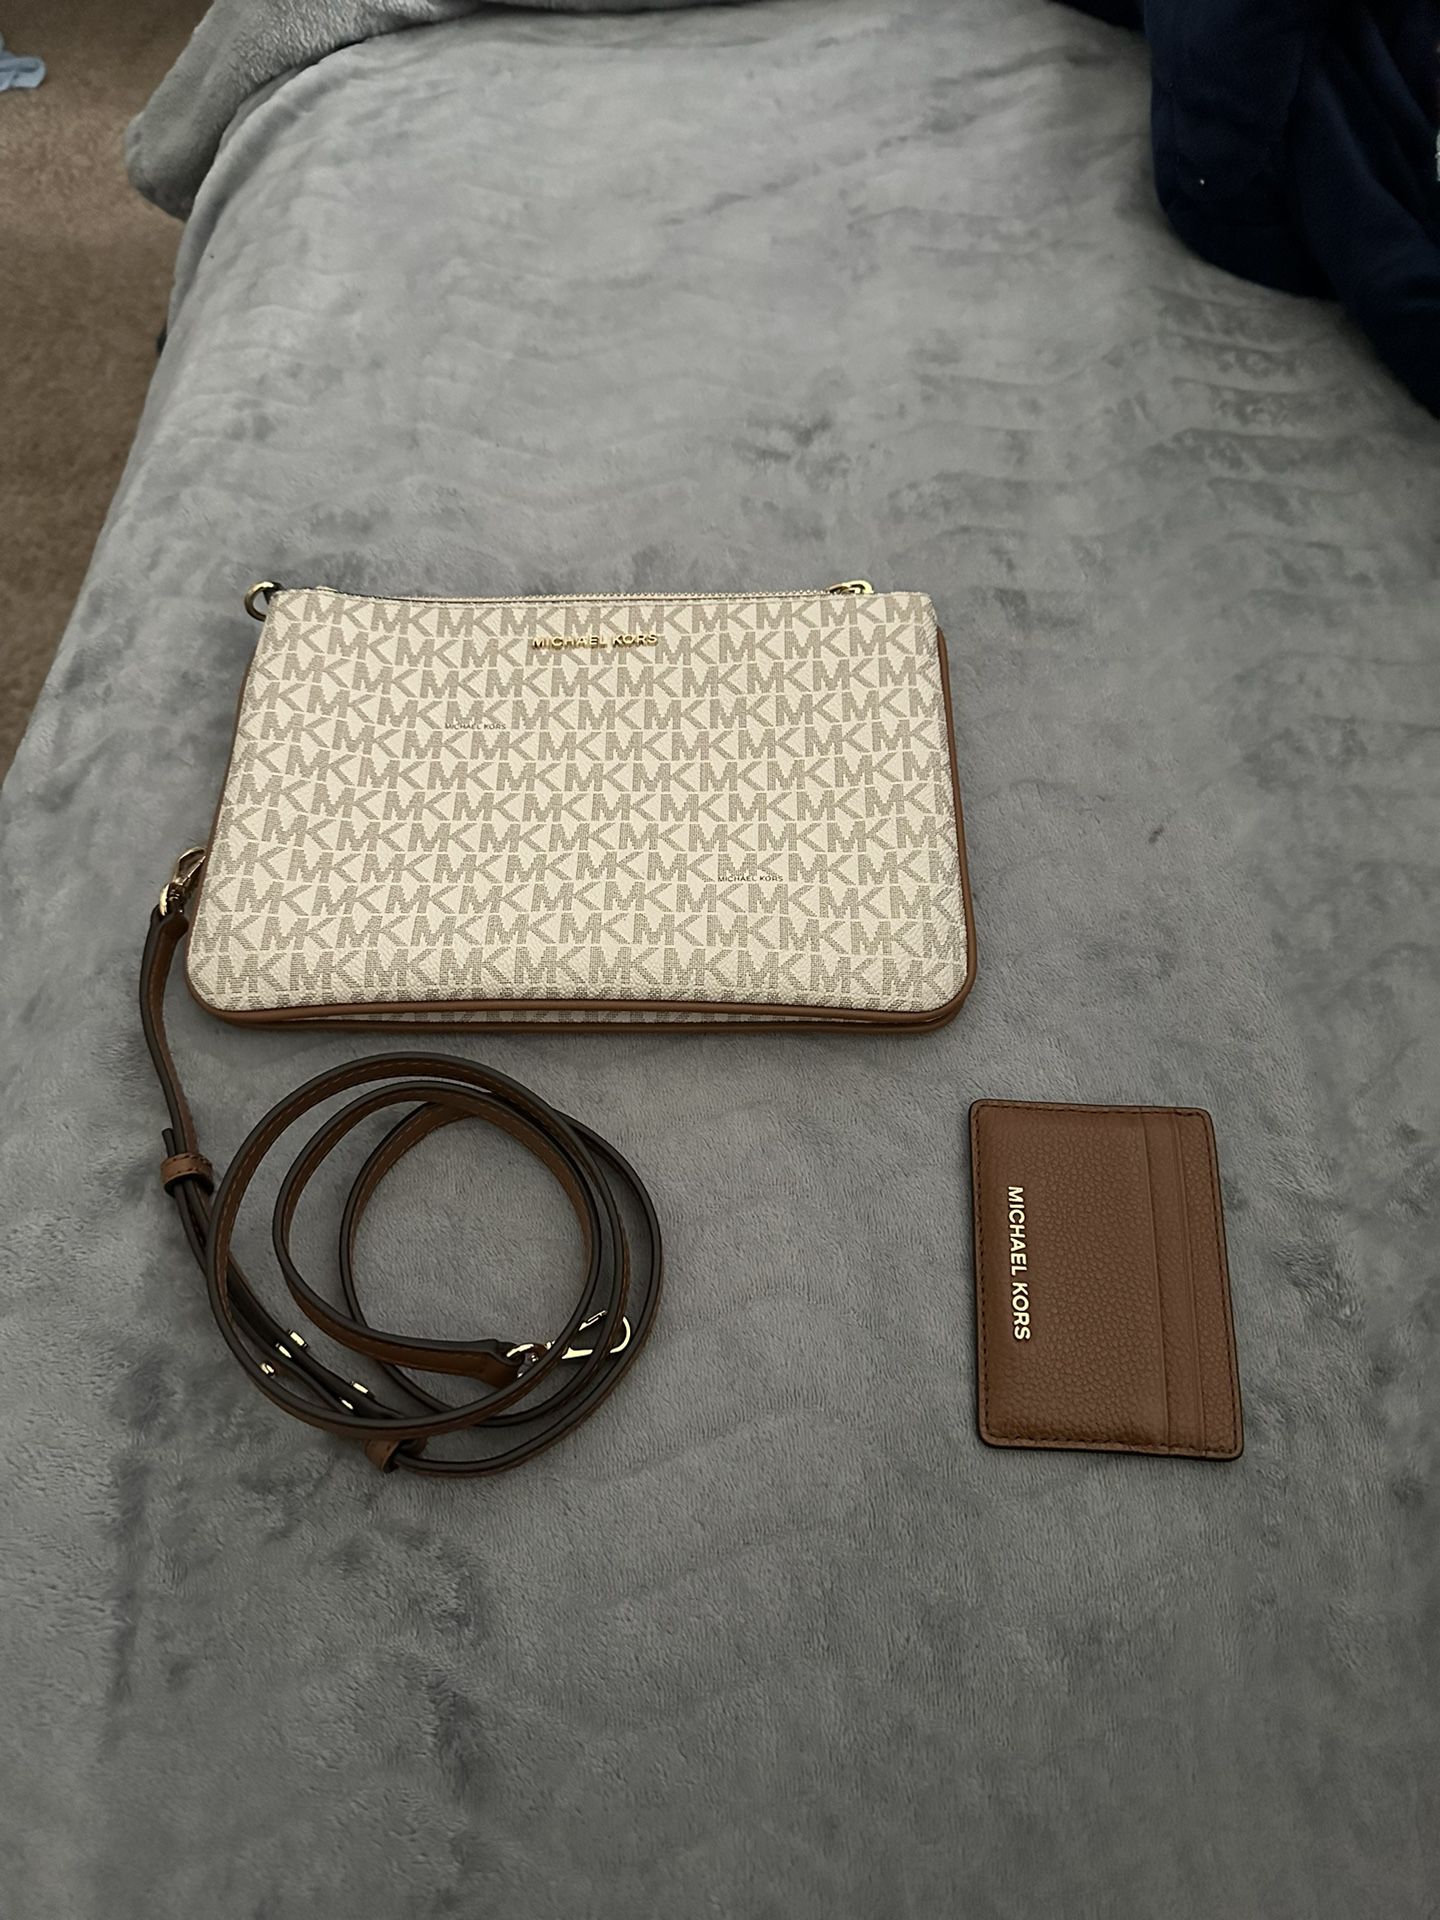 Michael Kors Purse With Card Wallet 